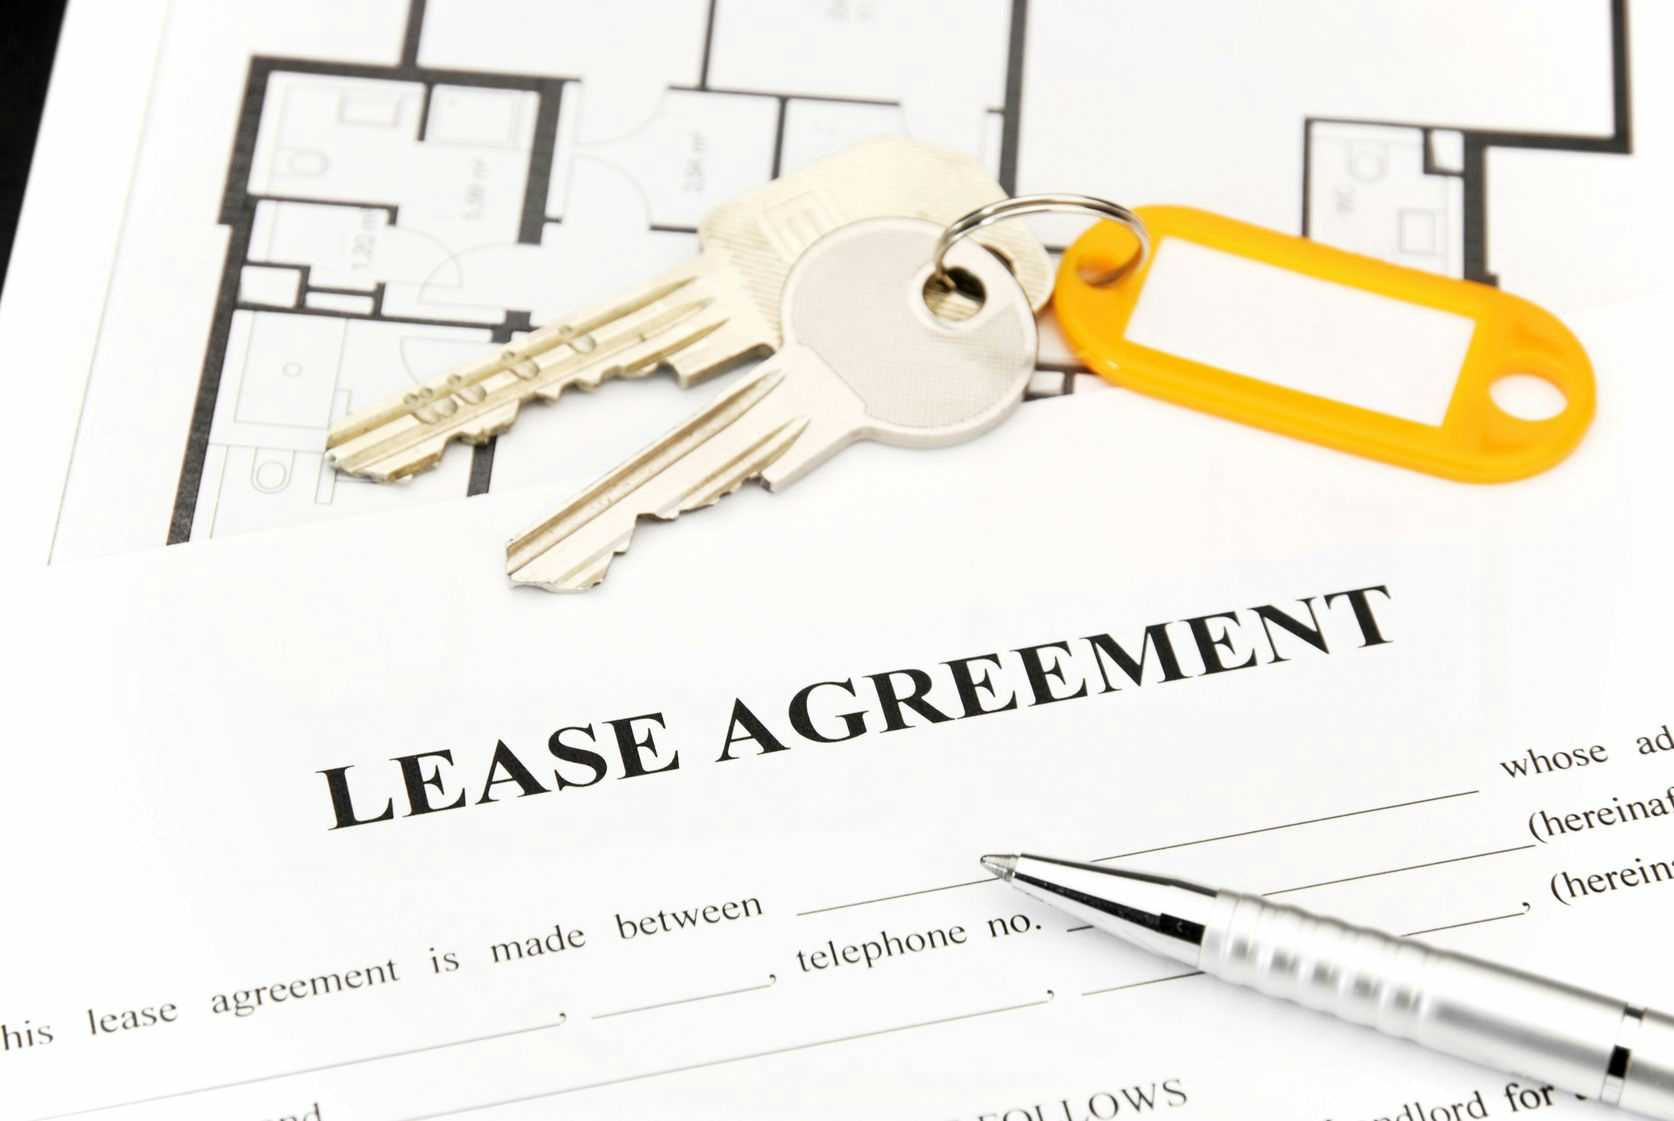 Real Estate Management Company Alleges Racial Discrimination Over Lease